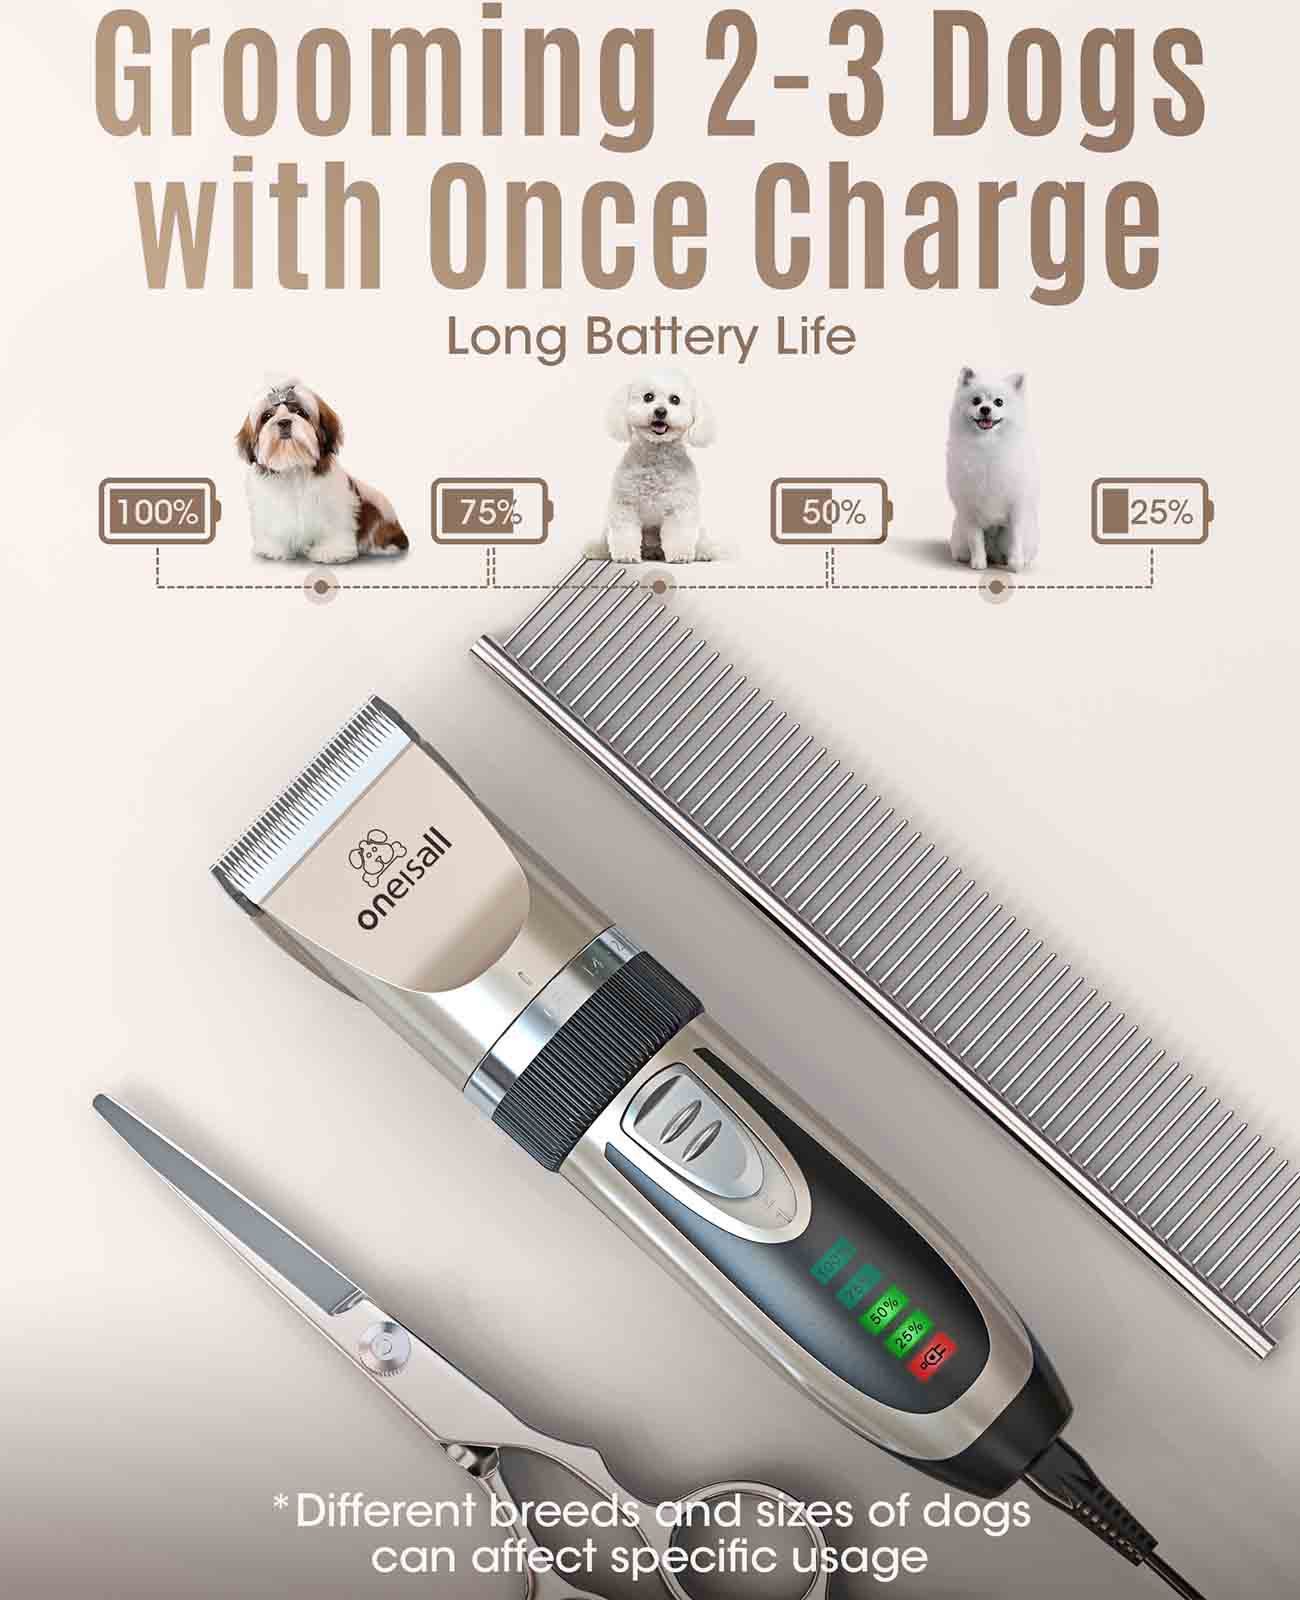 
                  
                    X2 - Oneisall 2 Speed Dog Grooming Clippers
                  
                